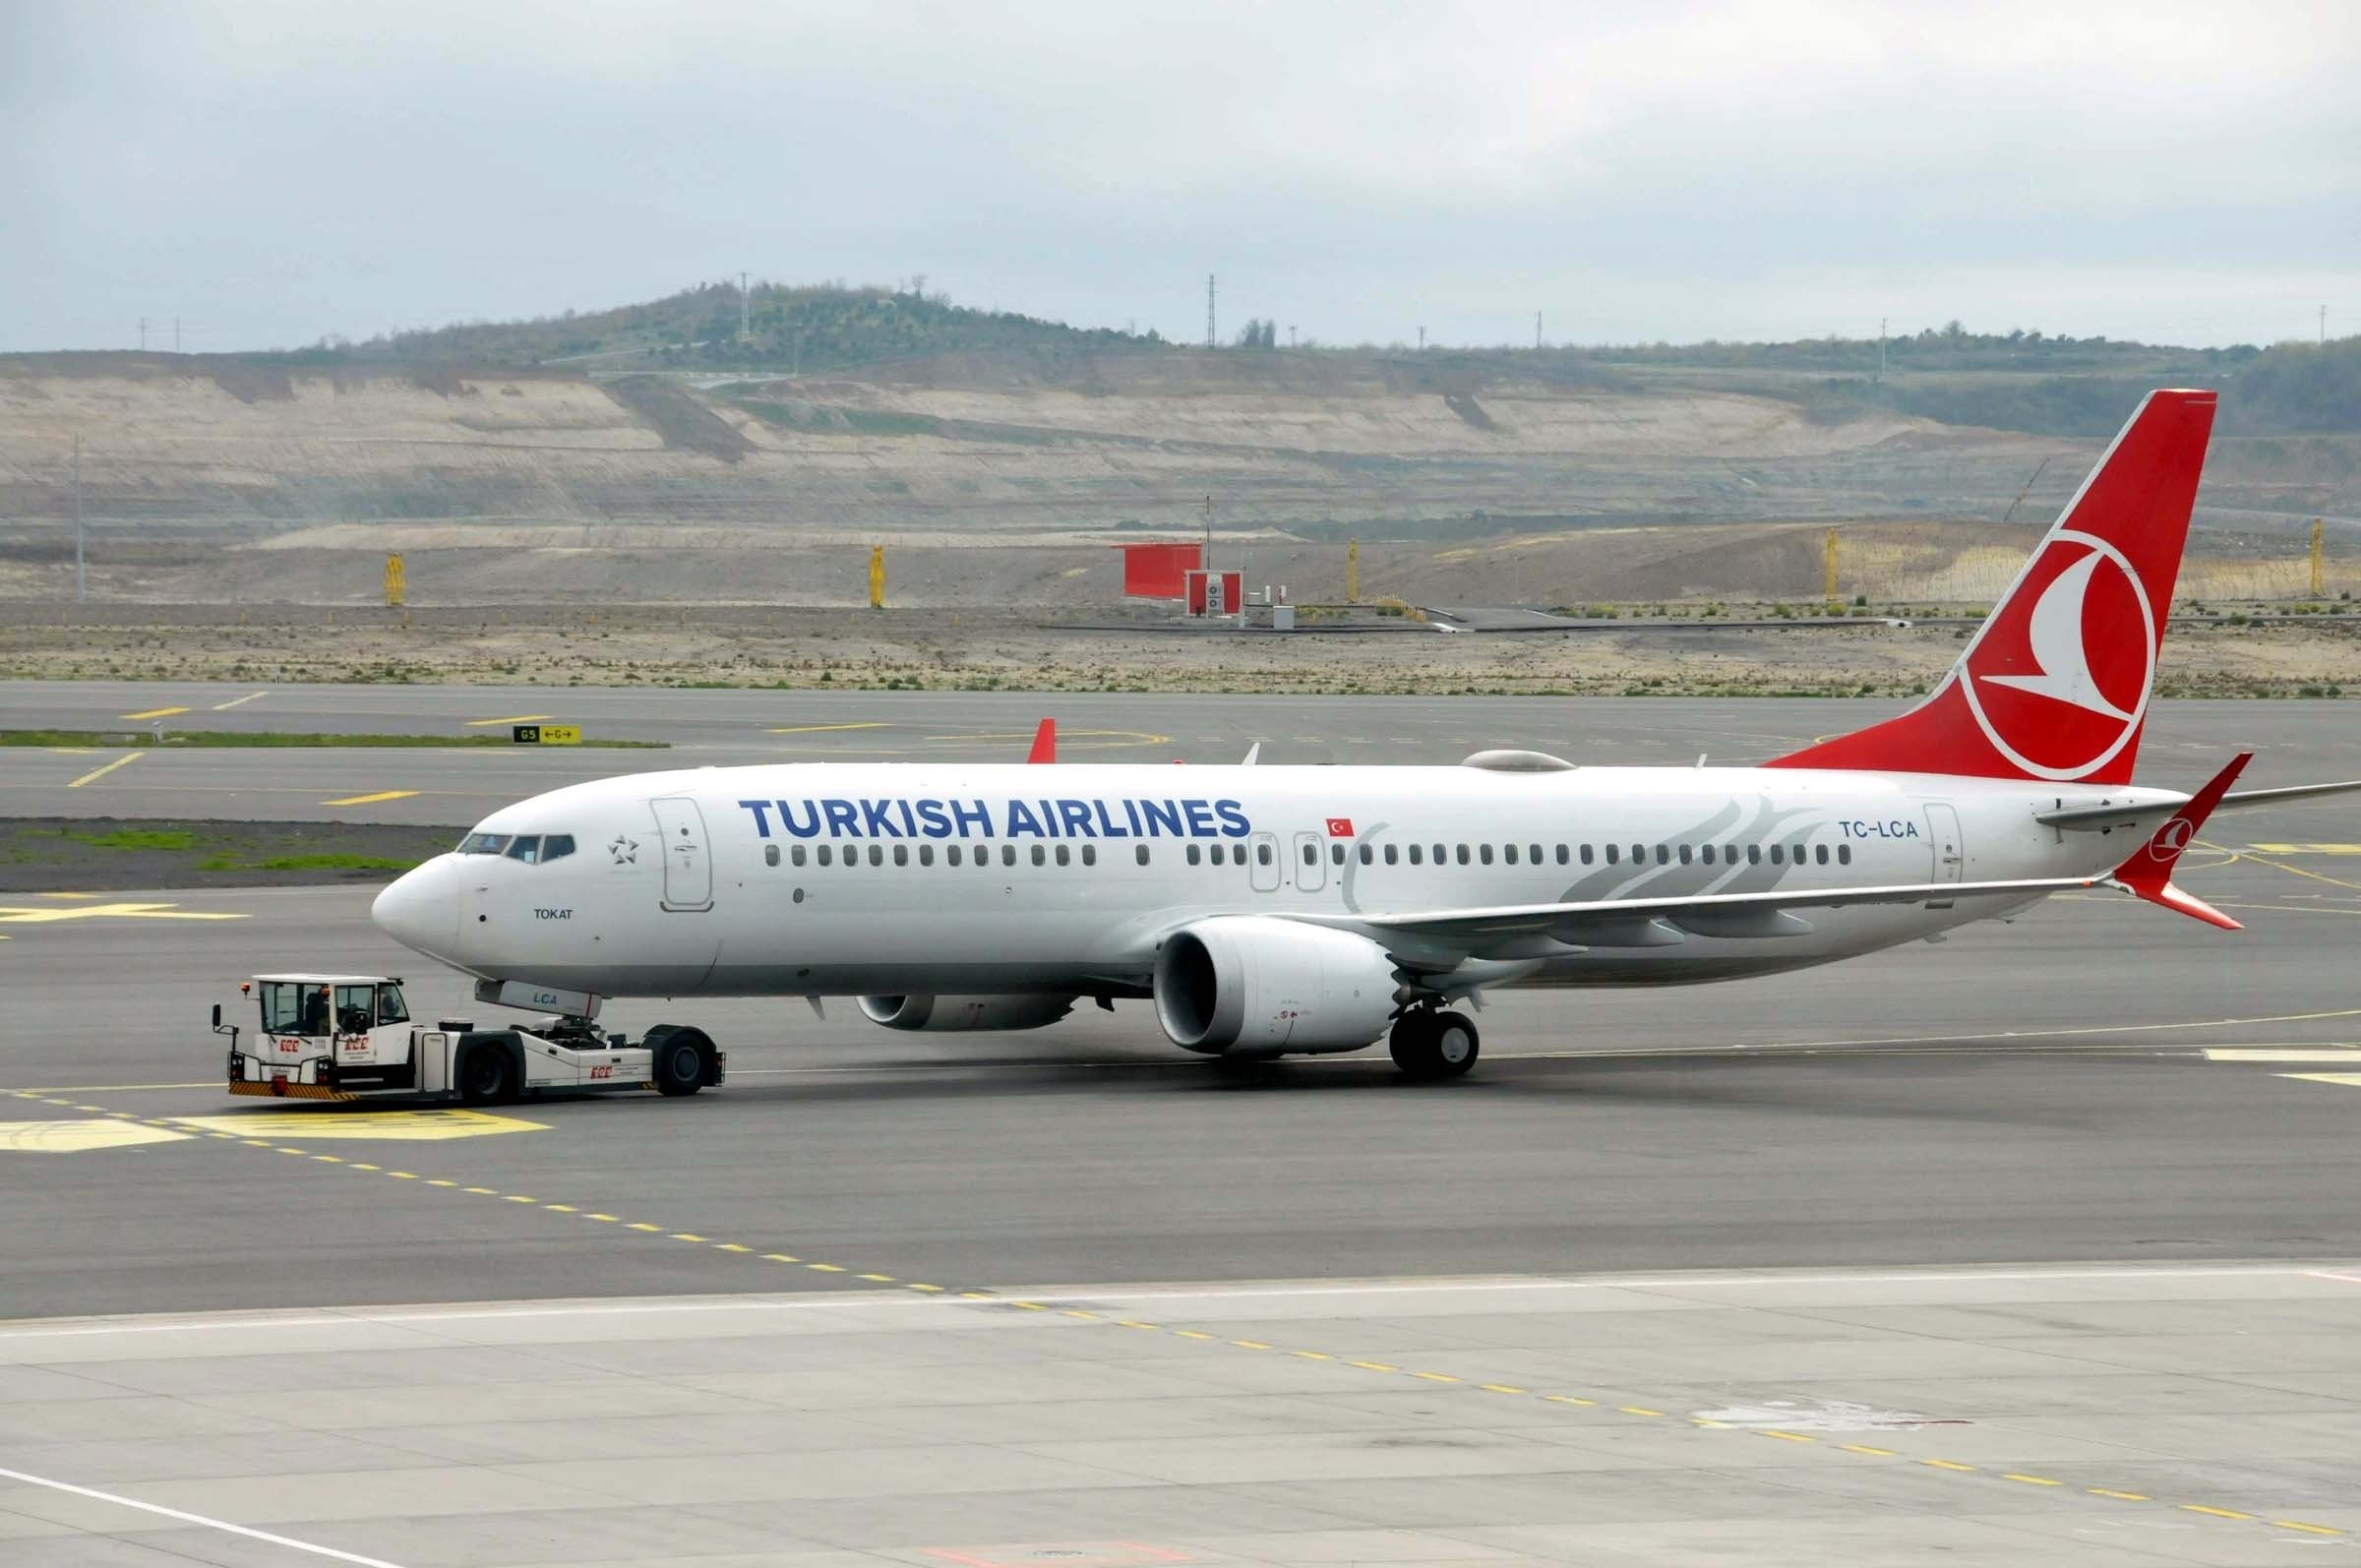 Turkish Airlines Launches Flights From Sofia To Dallas, Texas As Of 24 September